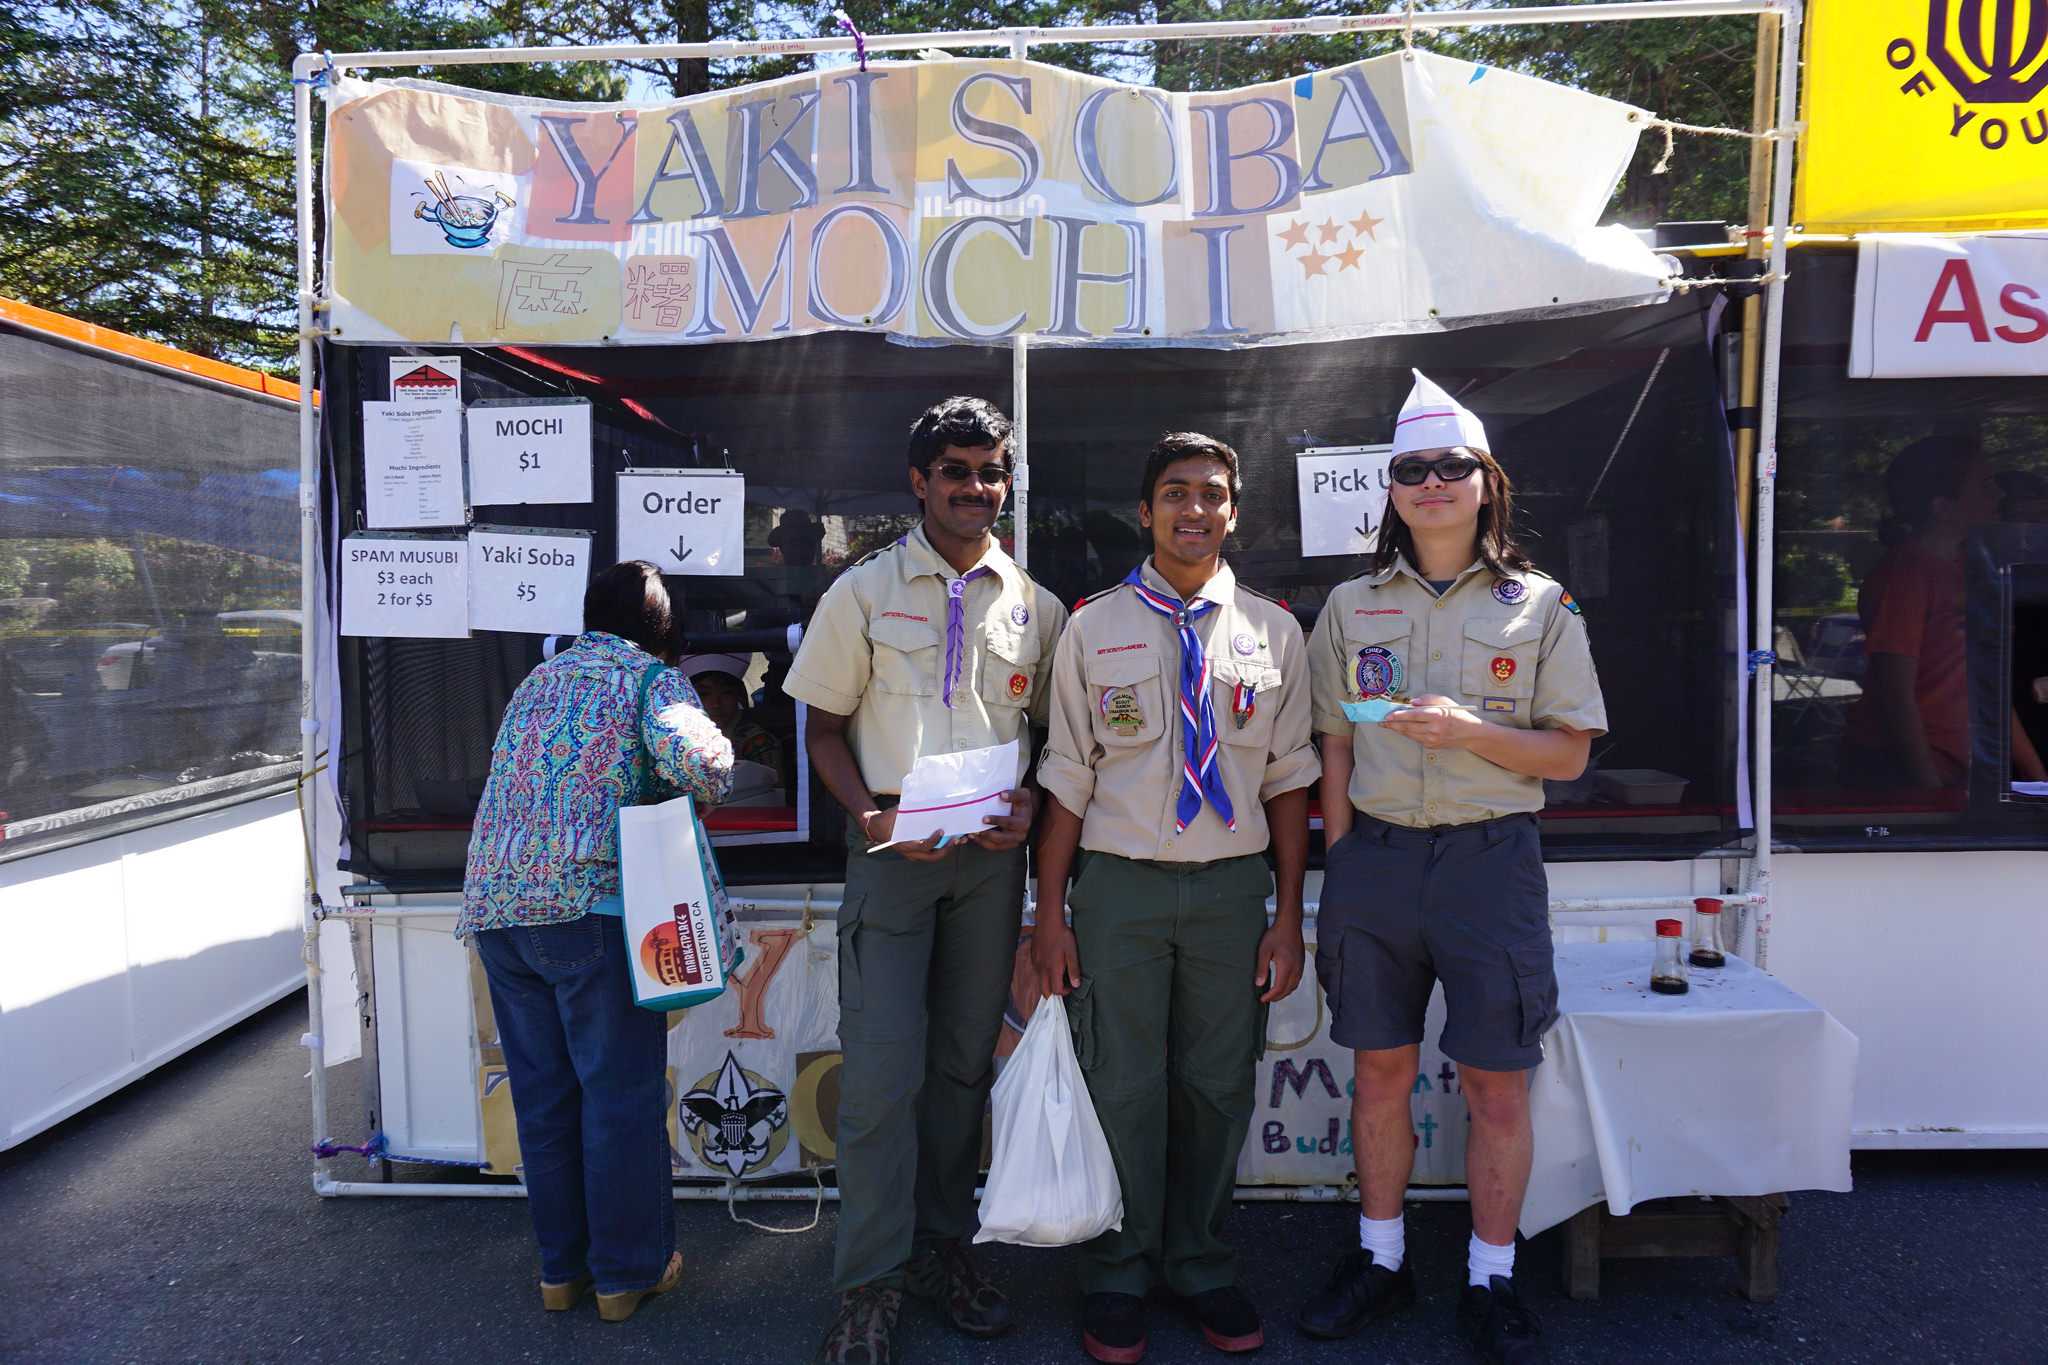 Scouts from Boy Scout Troop 487 stand in front of their Yakisoba Stand. Troop 487 reserves a stand at the Cherry Blossom Festival every year.